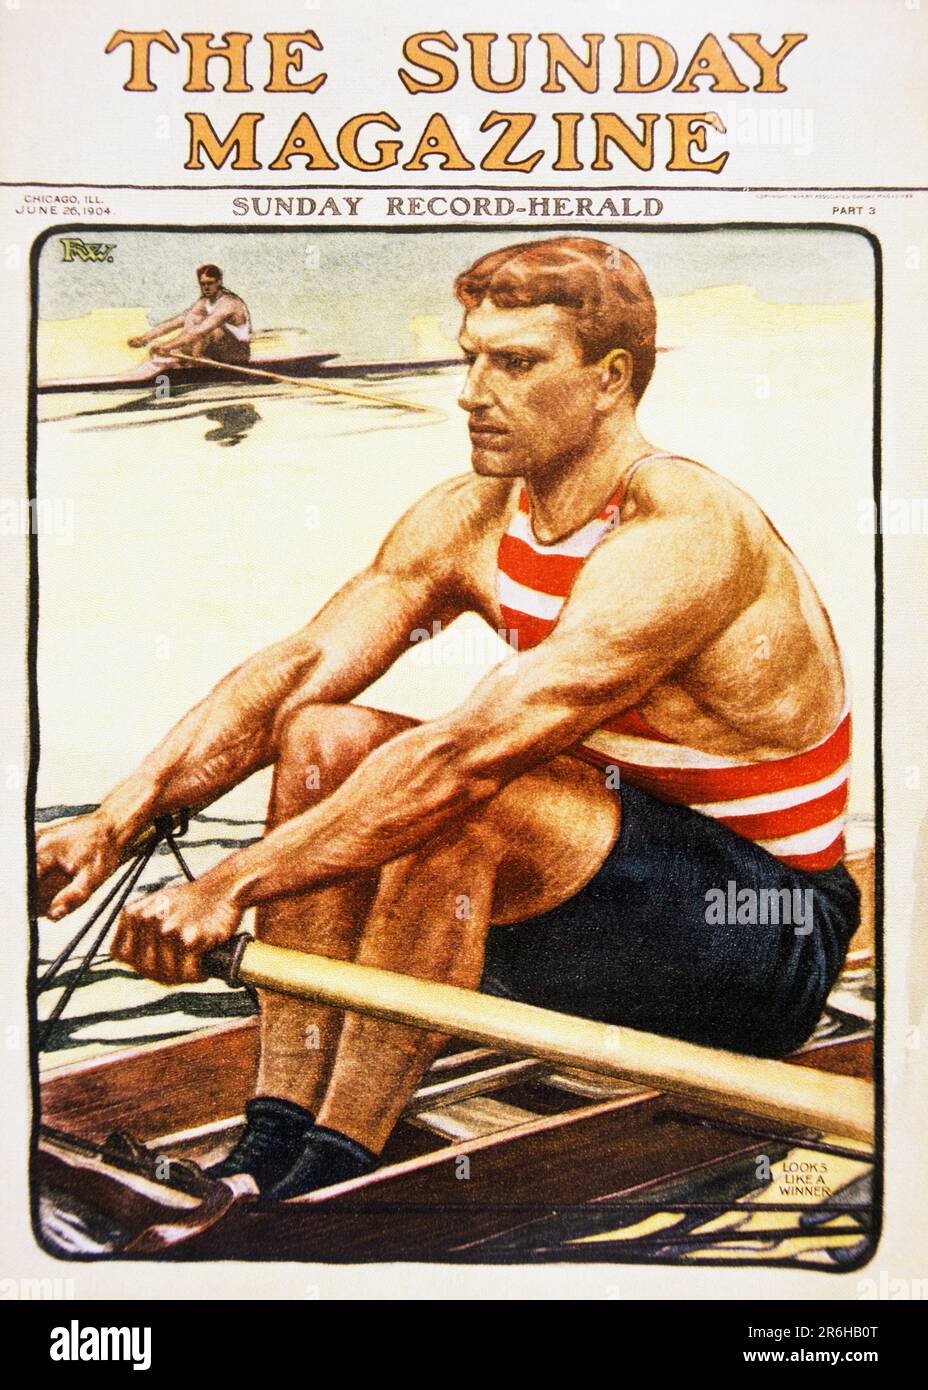 1900s CLOSE-UP MAN ROWING IN SINGLE SCULL SHELL BOAT WITH DOUBLE SCULLS OARS SCULLING CHICAGO SUNDAY MAGAZINE JUNE 28 1904 - kh13516 NAW001 HARS ATHLETE DOUBLE UNITED STATES PERSONS SHELL UNITED STATES OF AMERICA MALES ATHLETIC EXPRESSIONS NORTH AMERICA NORTH AMERICAN ACTIVITY PHYSICAL STRENGTH SCULLING SHELLS IN NARROW OARS MADE CLOSE-UP COMPETITIVE DRAG FLEXIBILITY MUSCLES ILLINOIS ORIGINALLY RIGGERS ROWING BOAT SCULL SINGLE SCULL CAUCASIAN ETHNICITY DESIGNED IL OLD FASHIONED SCULLS Stock Photo